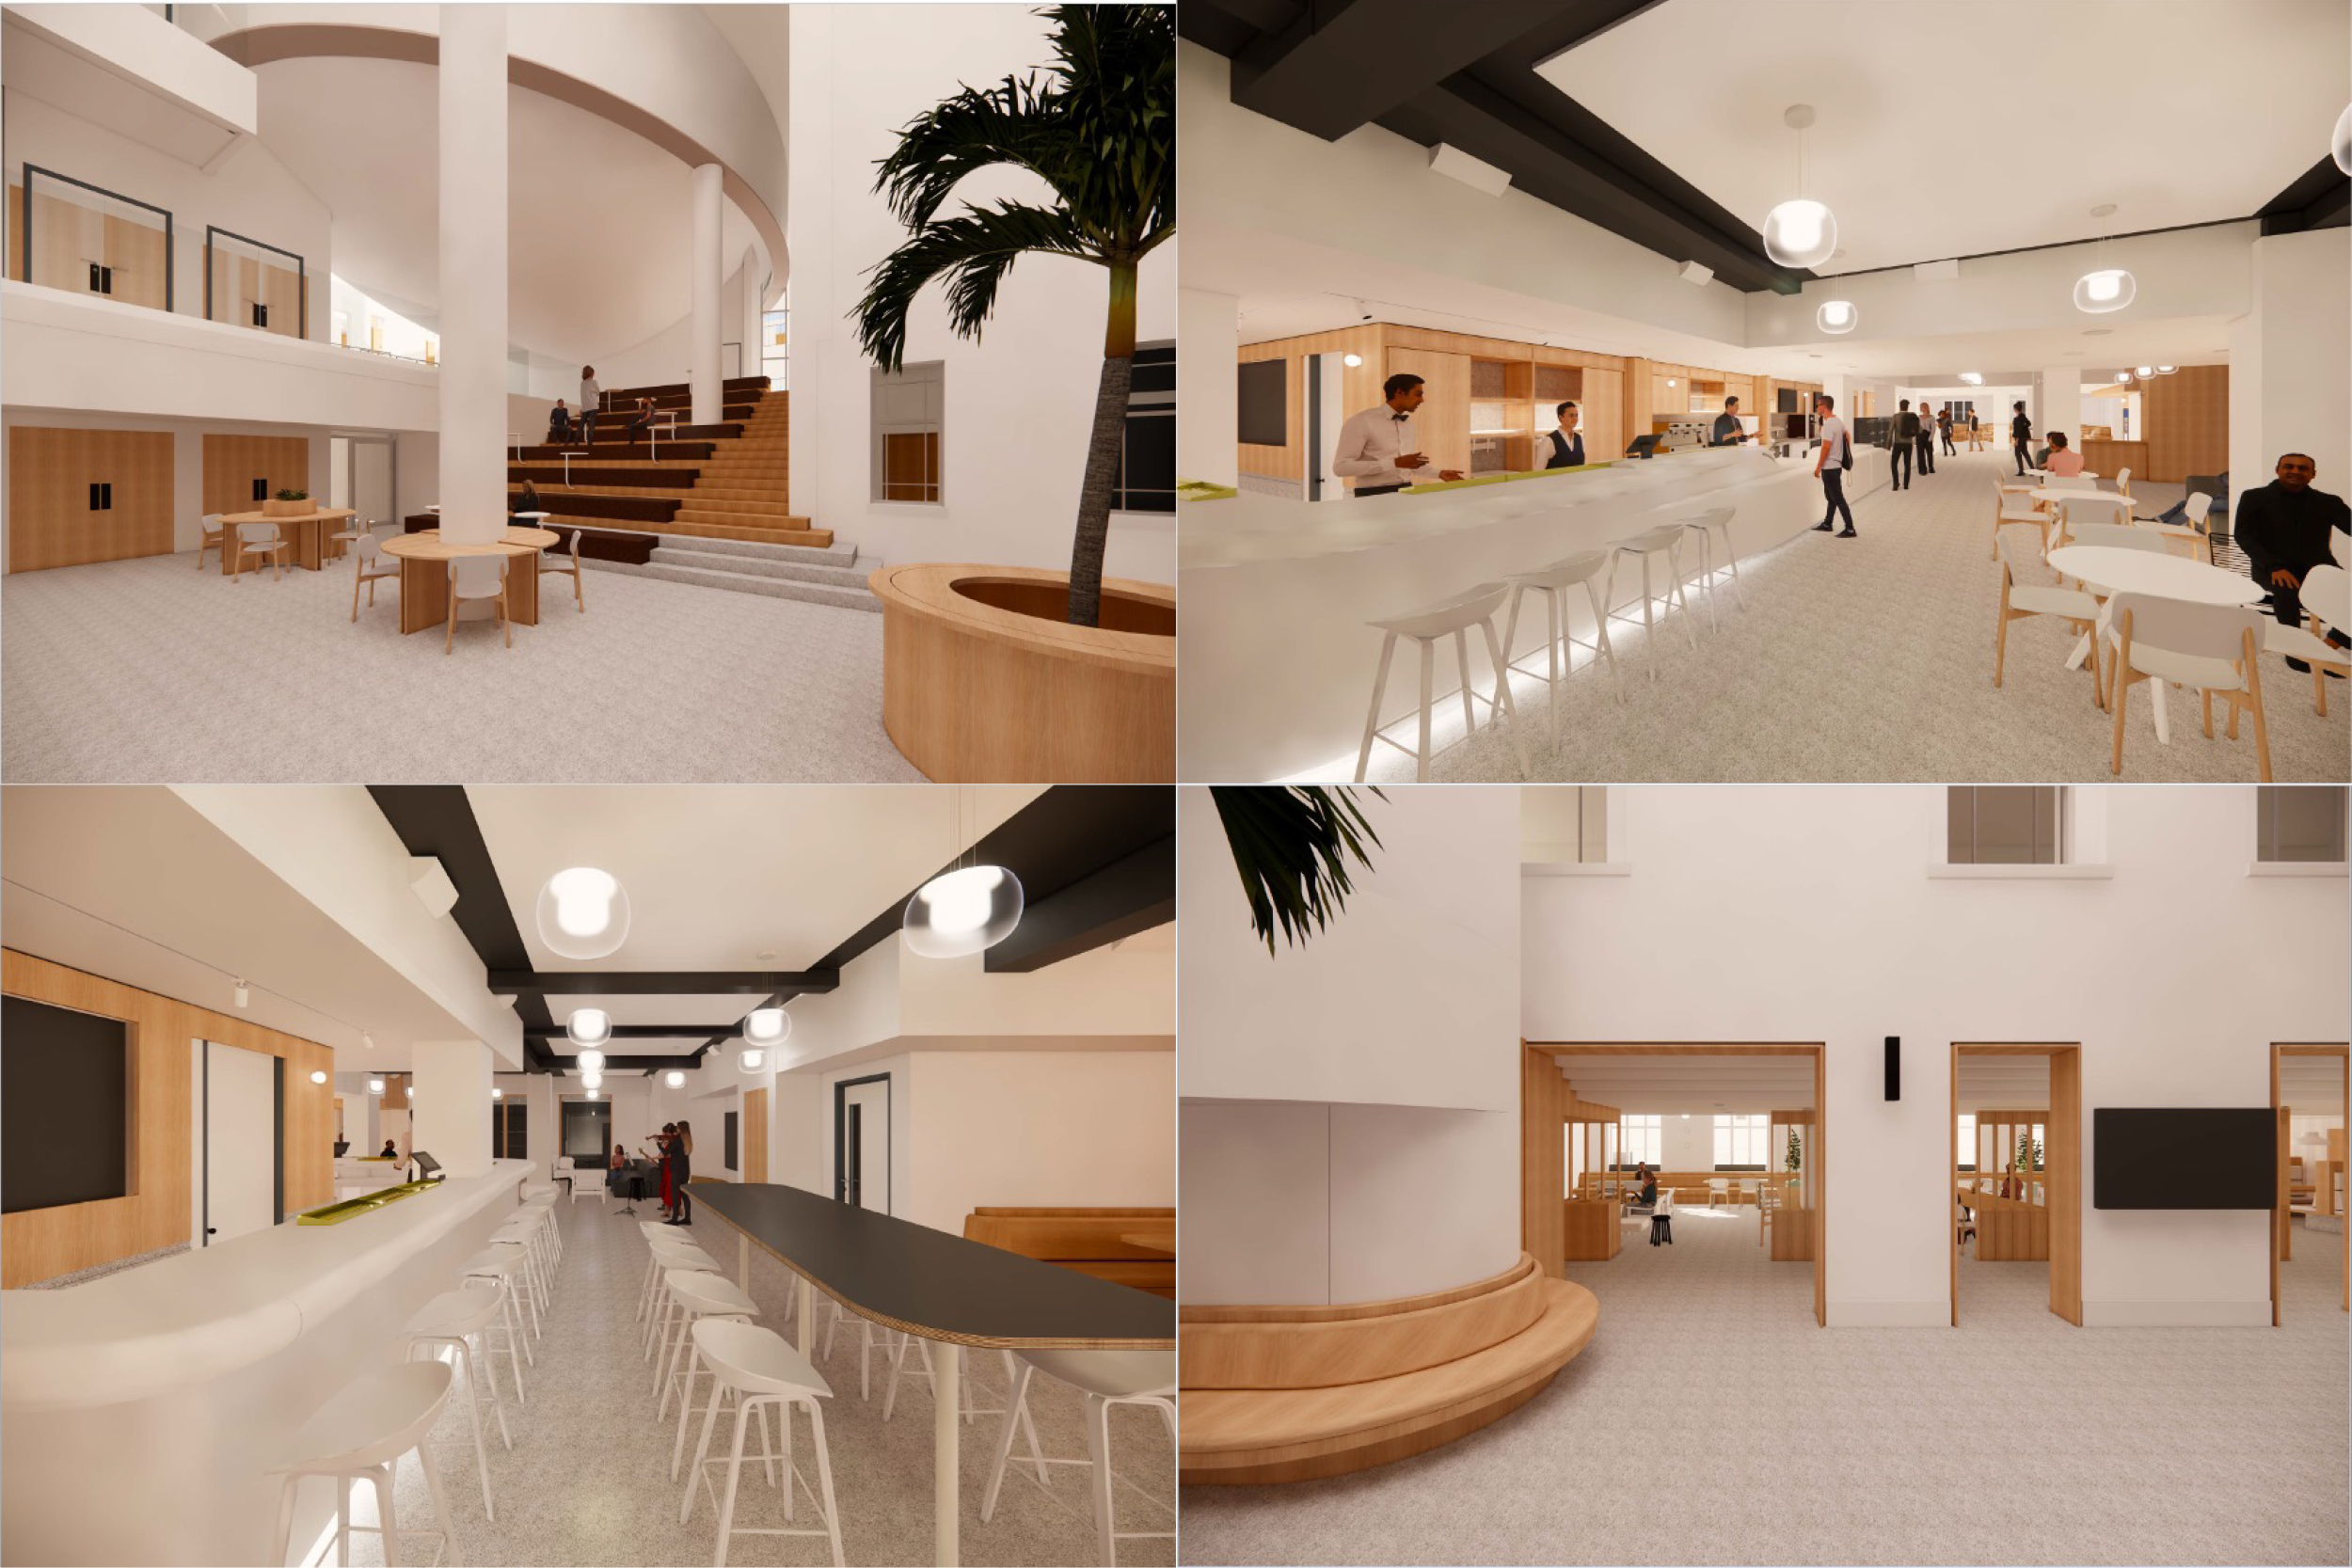 Artists impressions of plans for new social space at Keppel Street